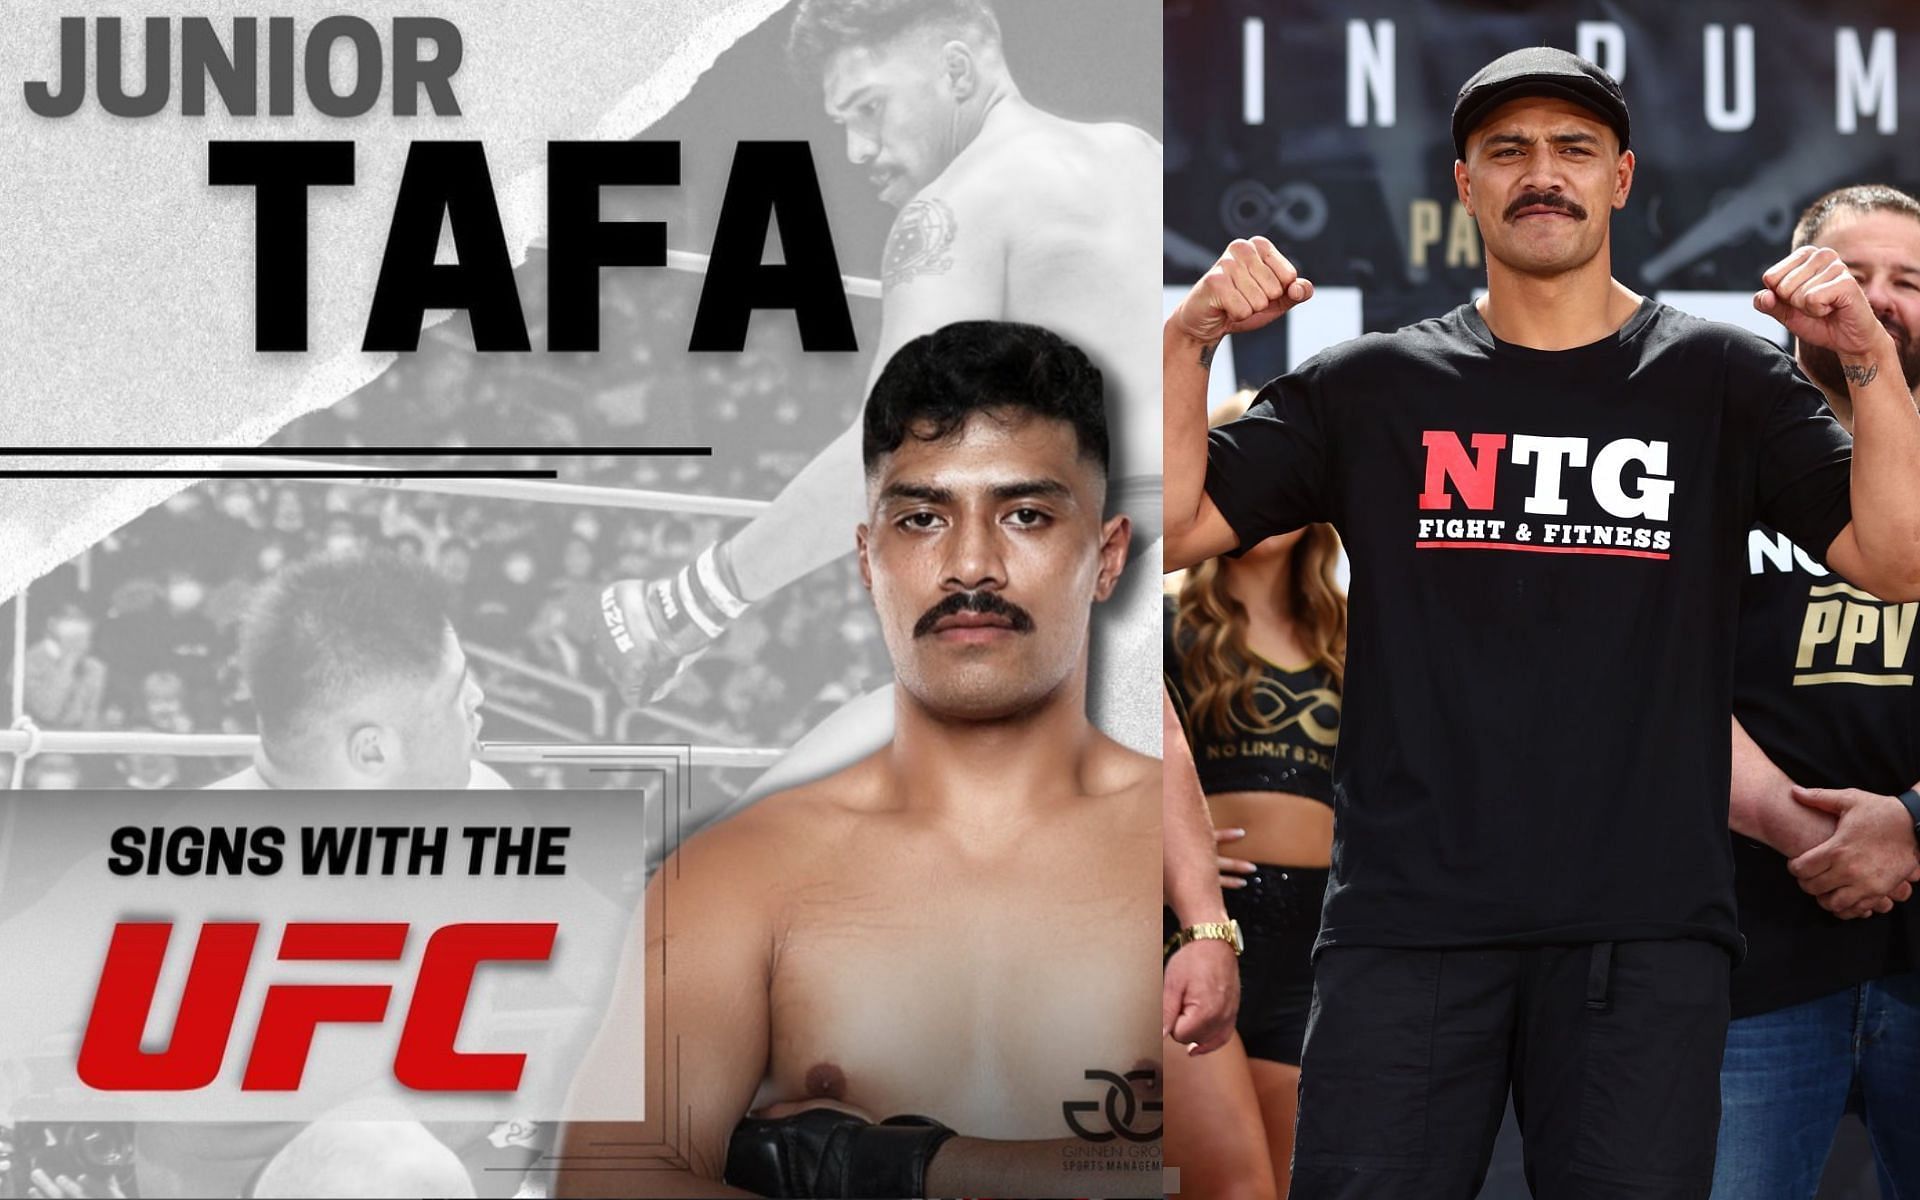 Junior Tafa's brother Junior Tafa's brother Who is the UFC